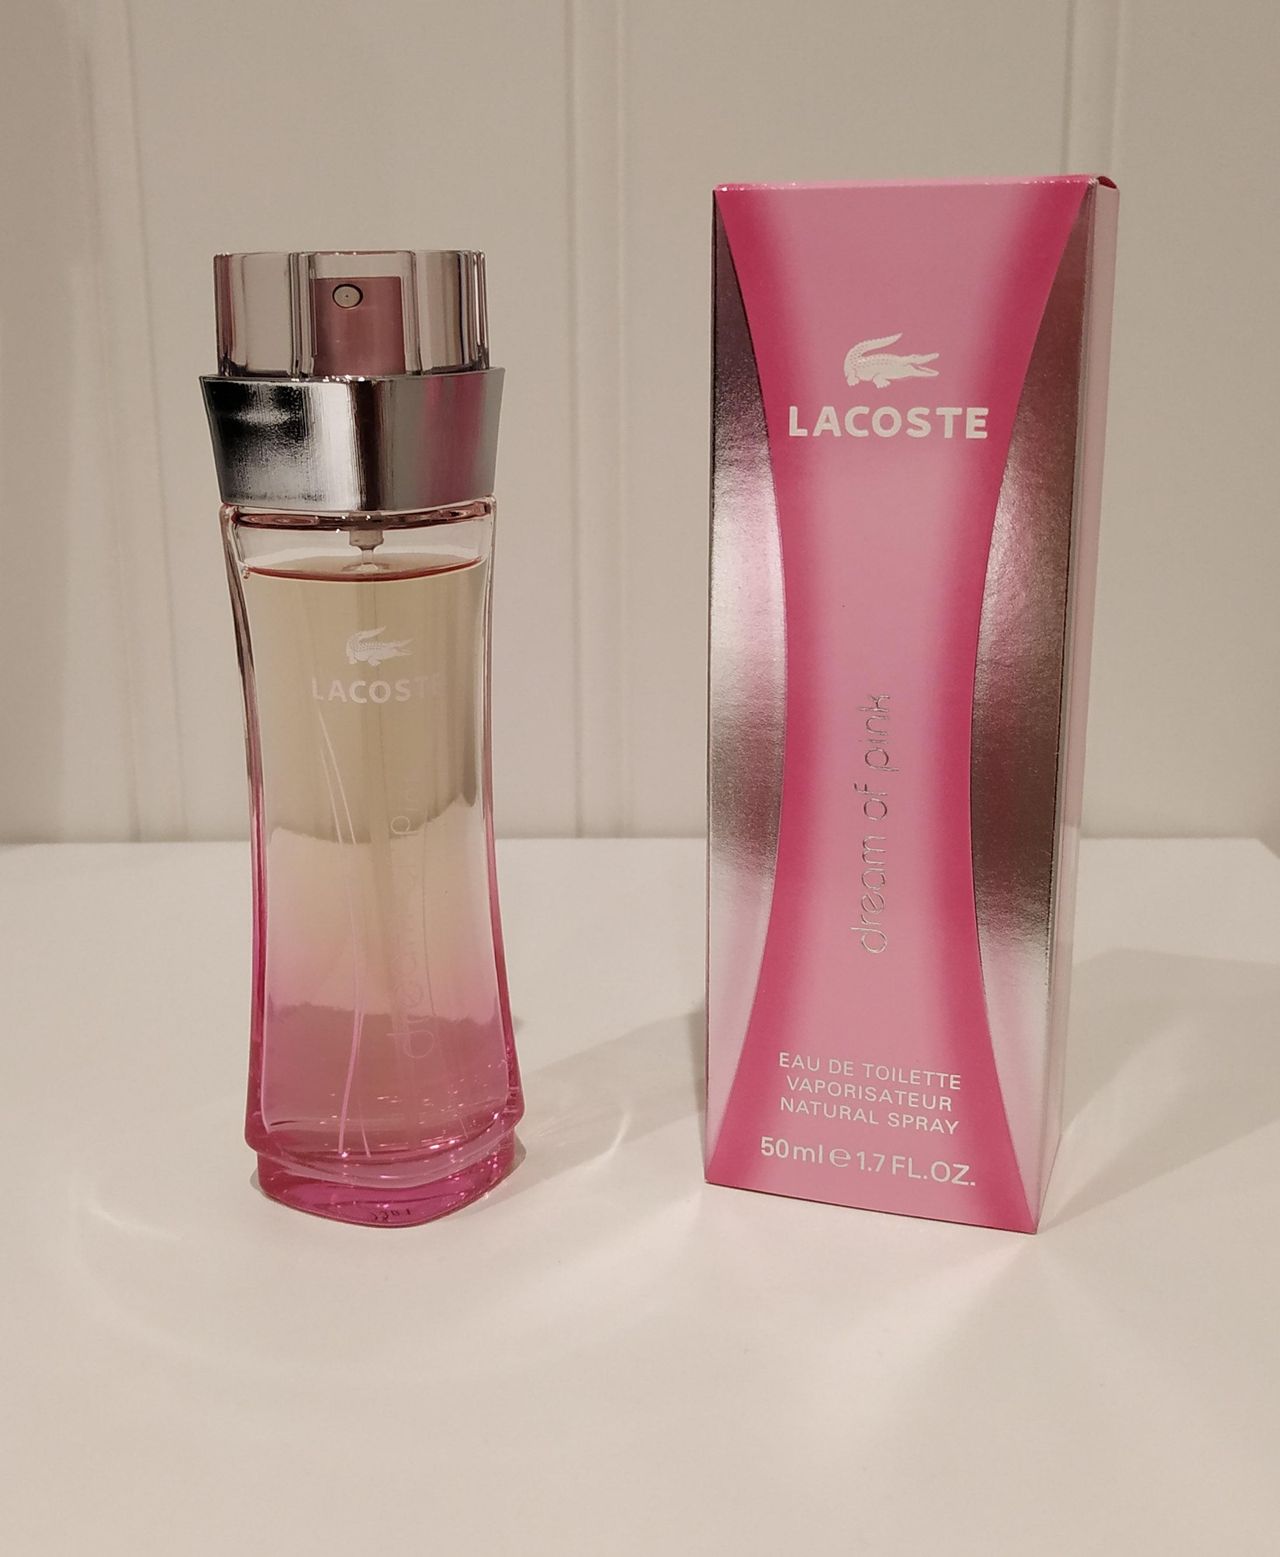 Parfyme - Lacoste Dream of edt 50 ml | FINN torget